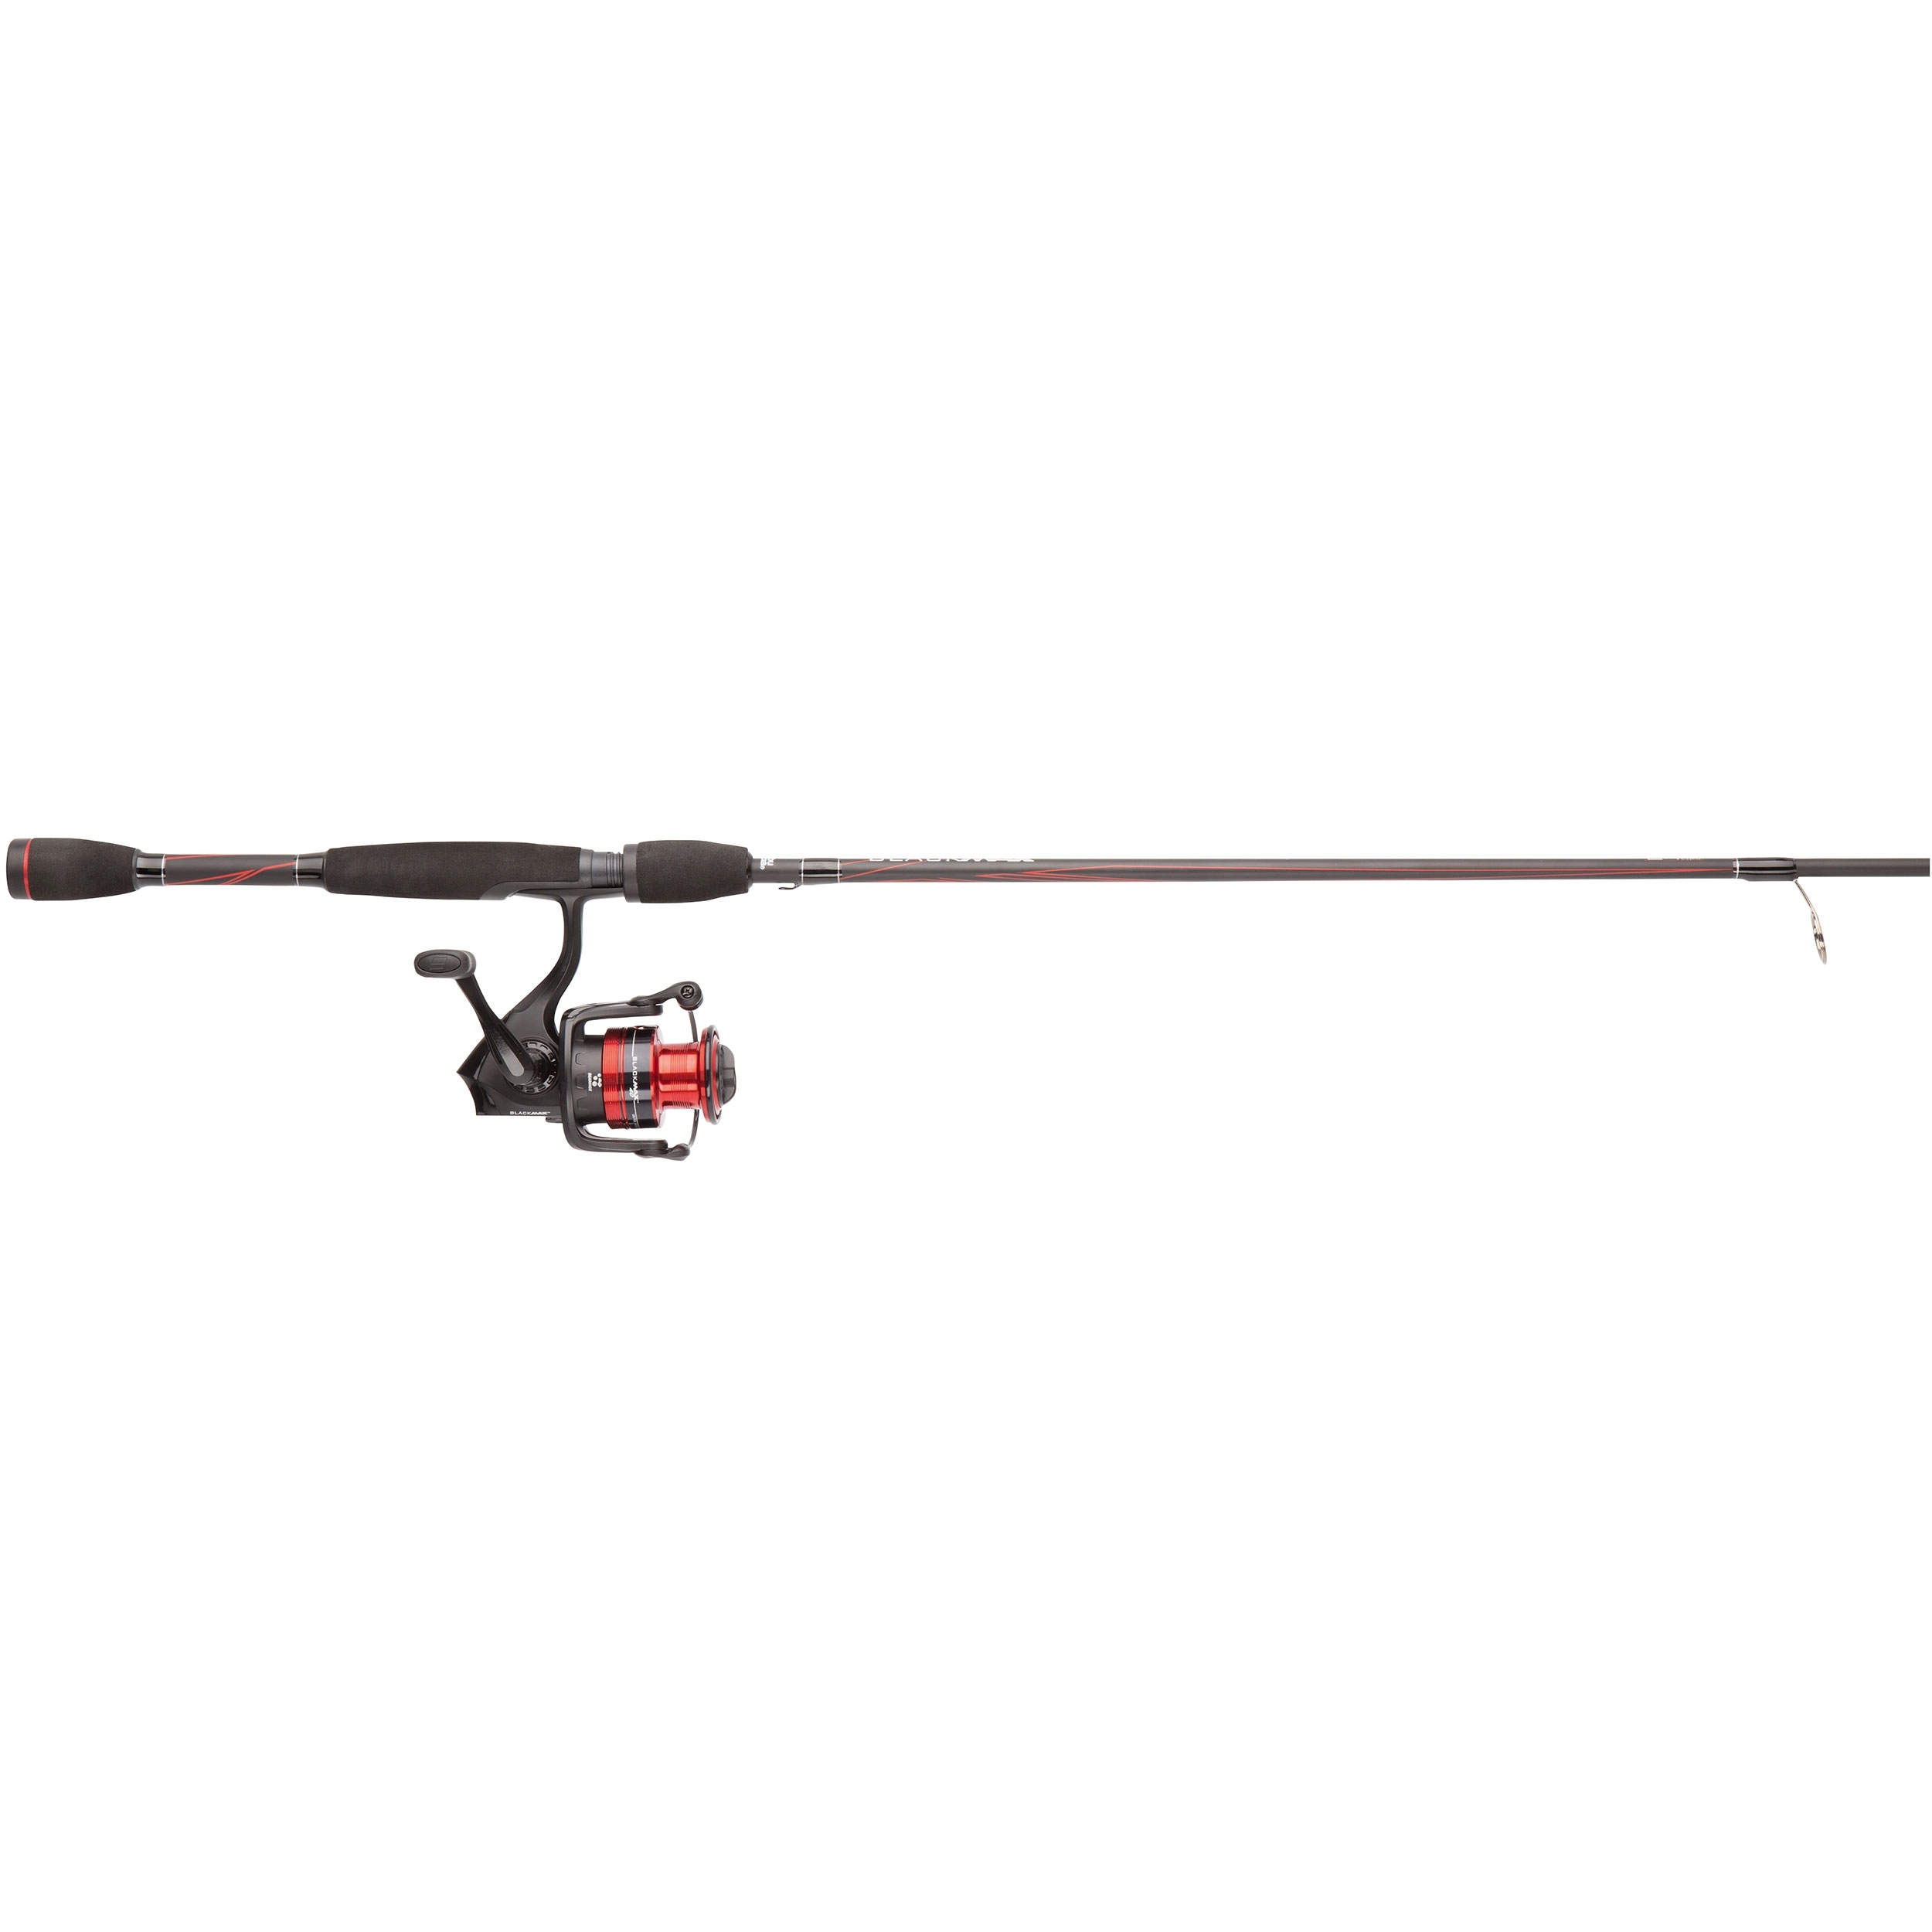 Abu Garcia Black Max FD Front Drag Combos - Spinning Reel Rod Outfits Kits